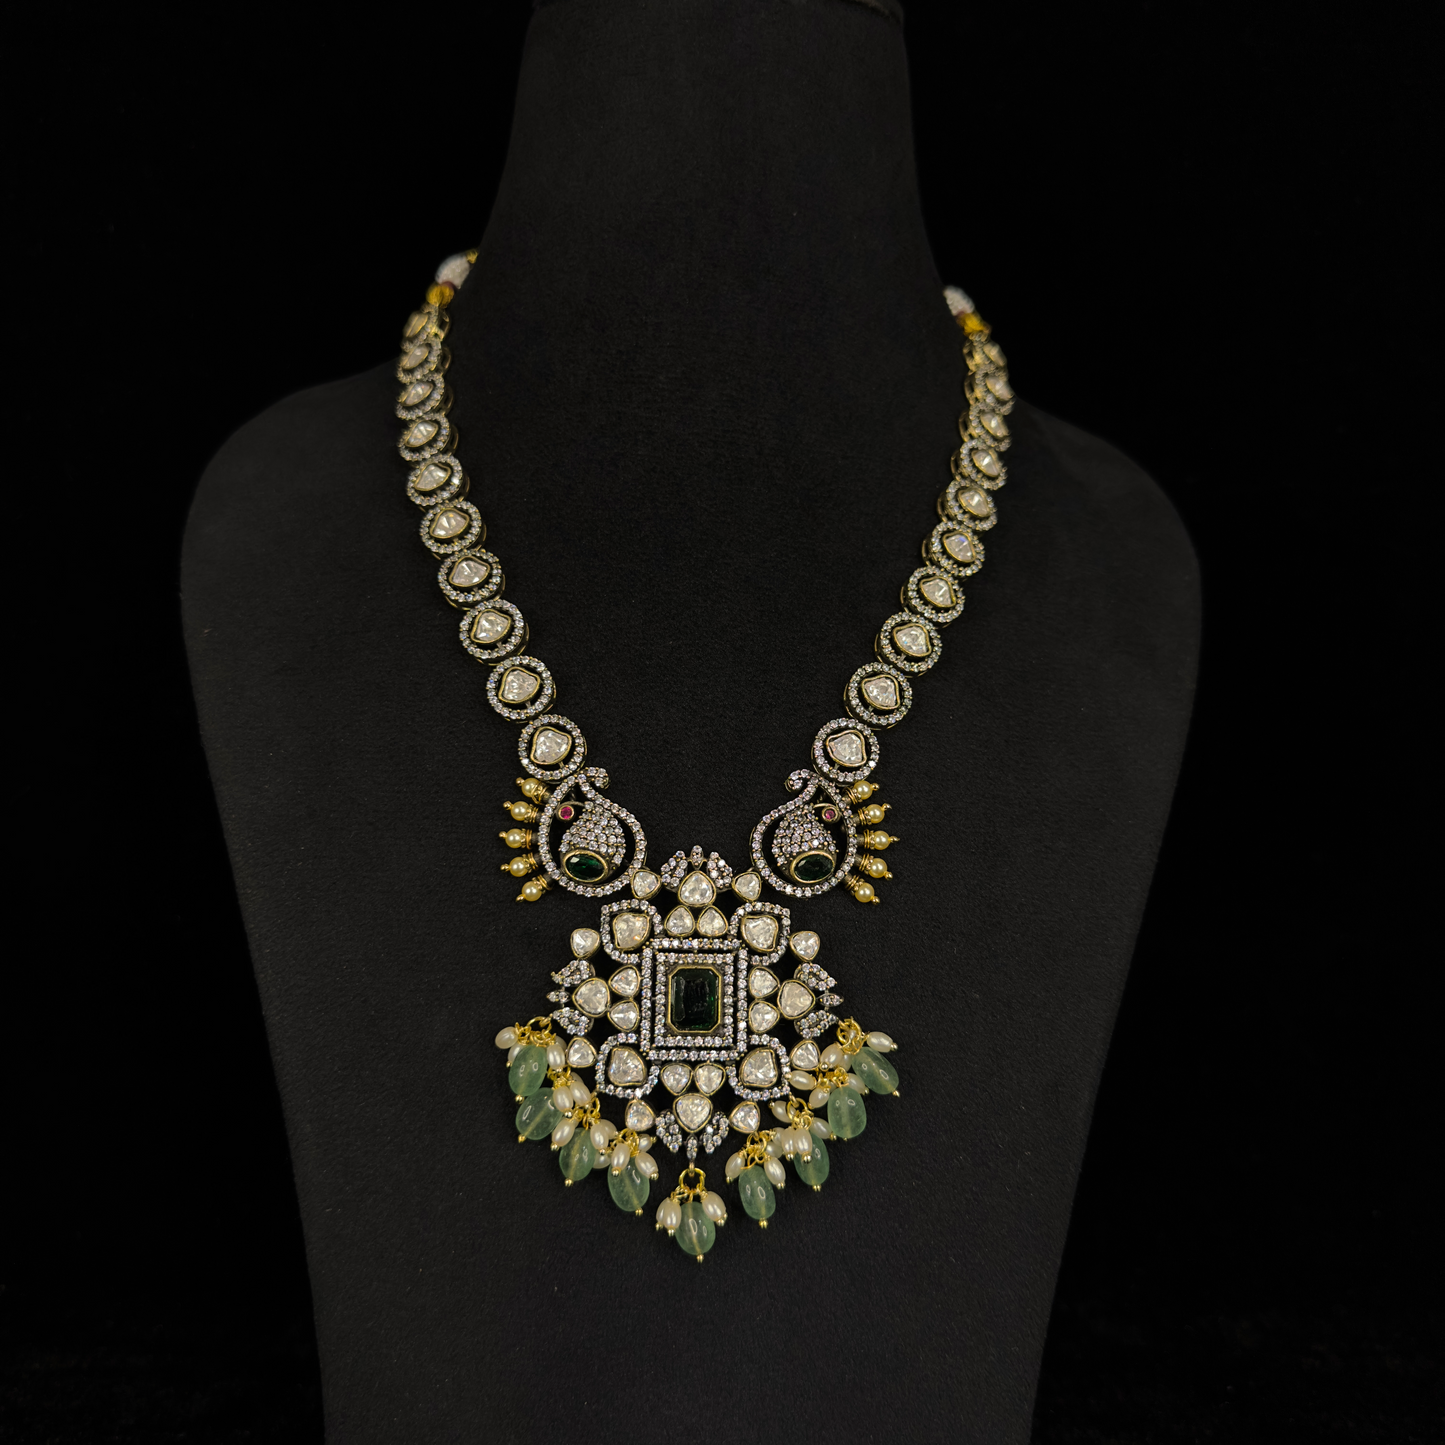 Victorian Polki Necklace with peacock motif & Earrings